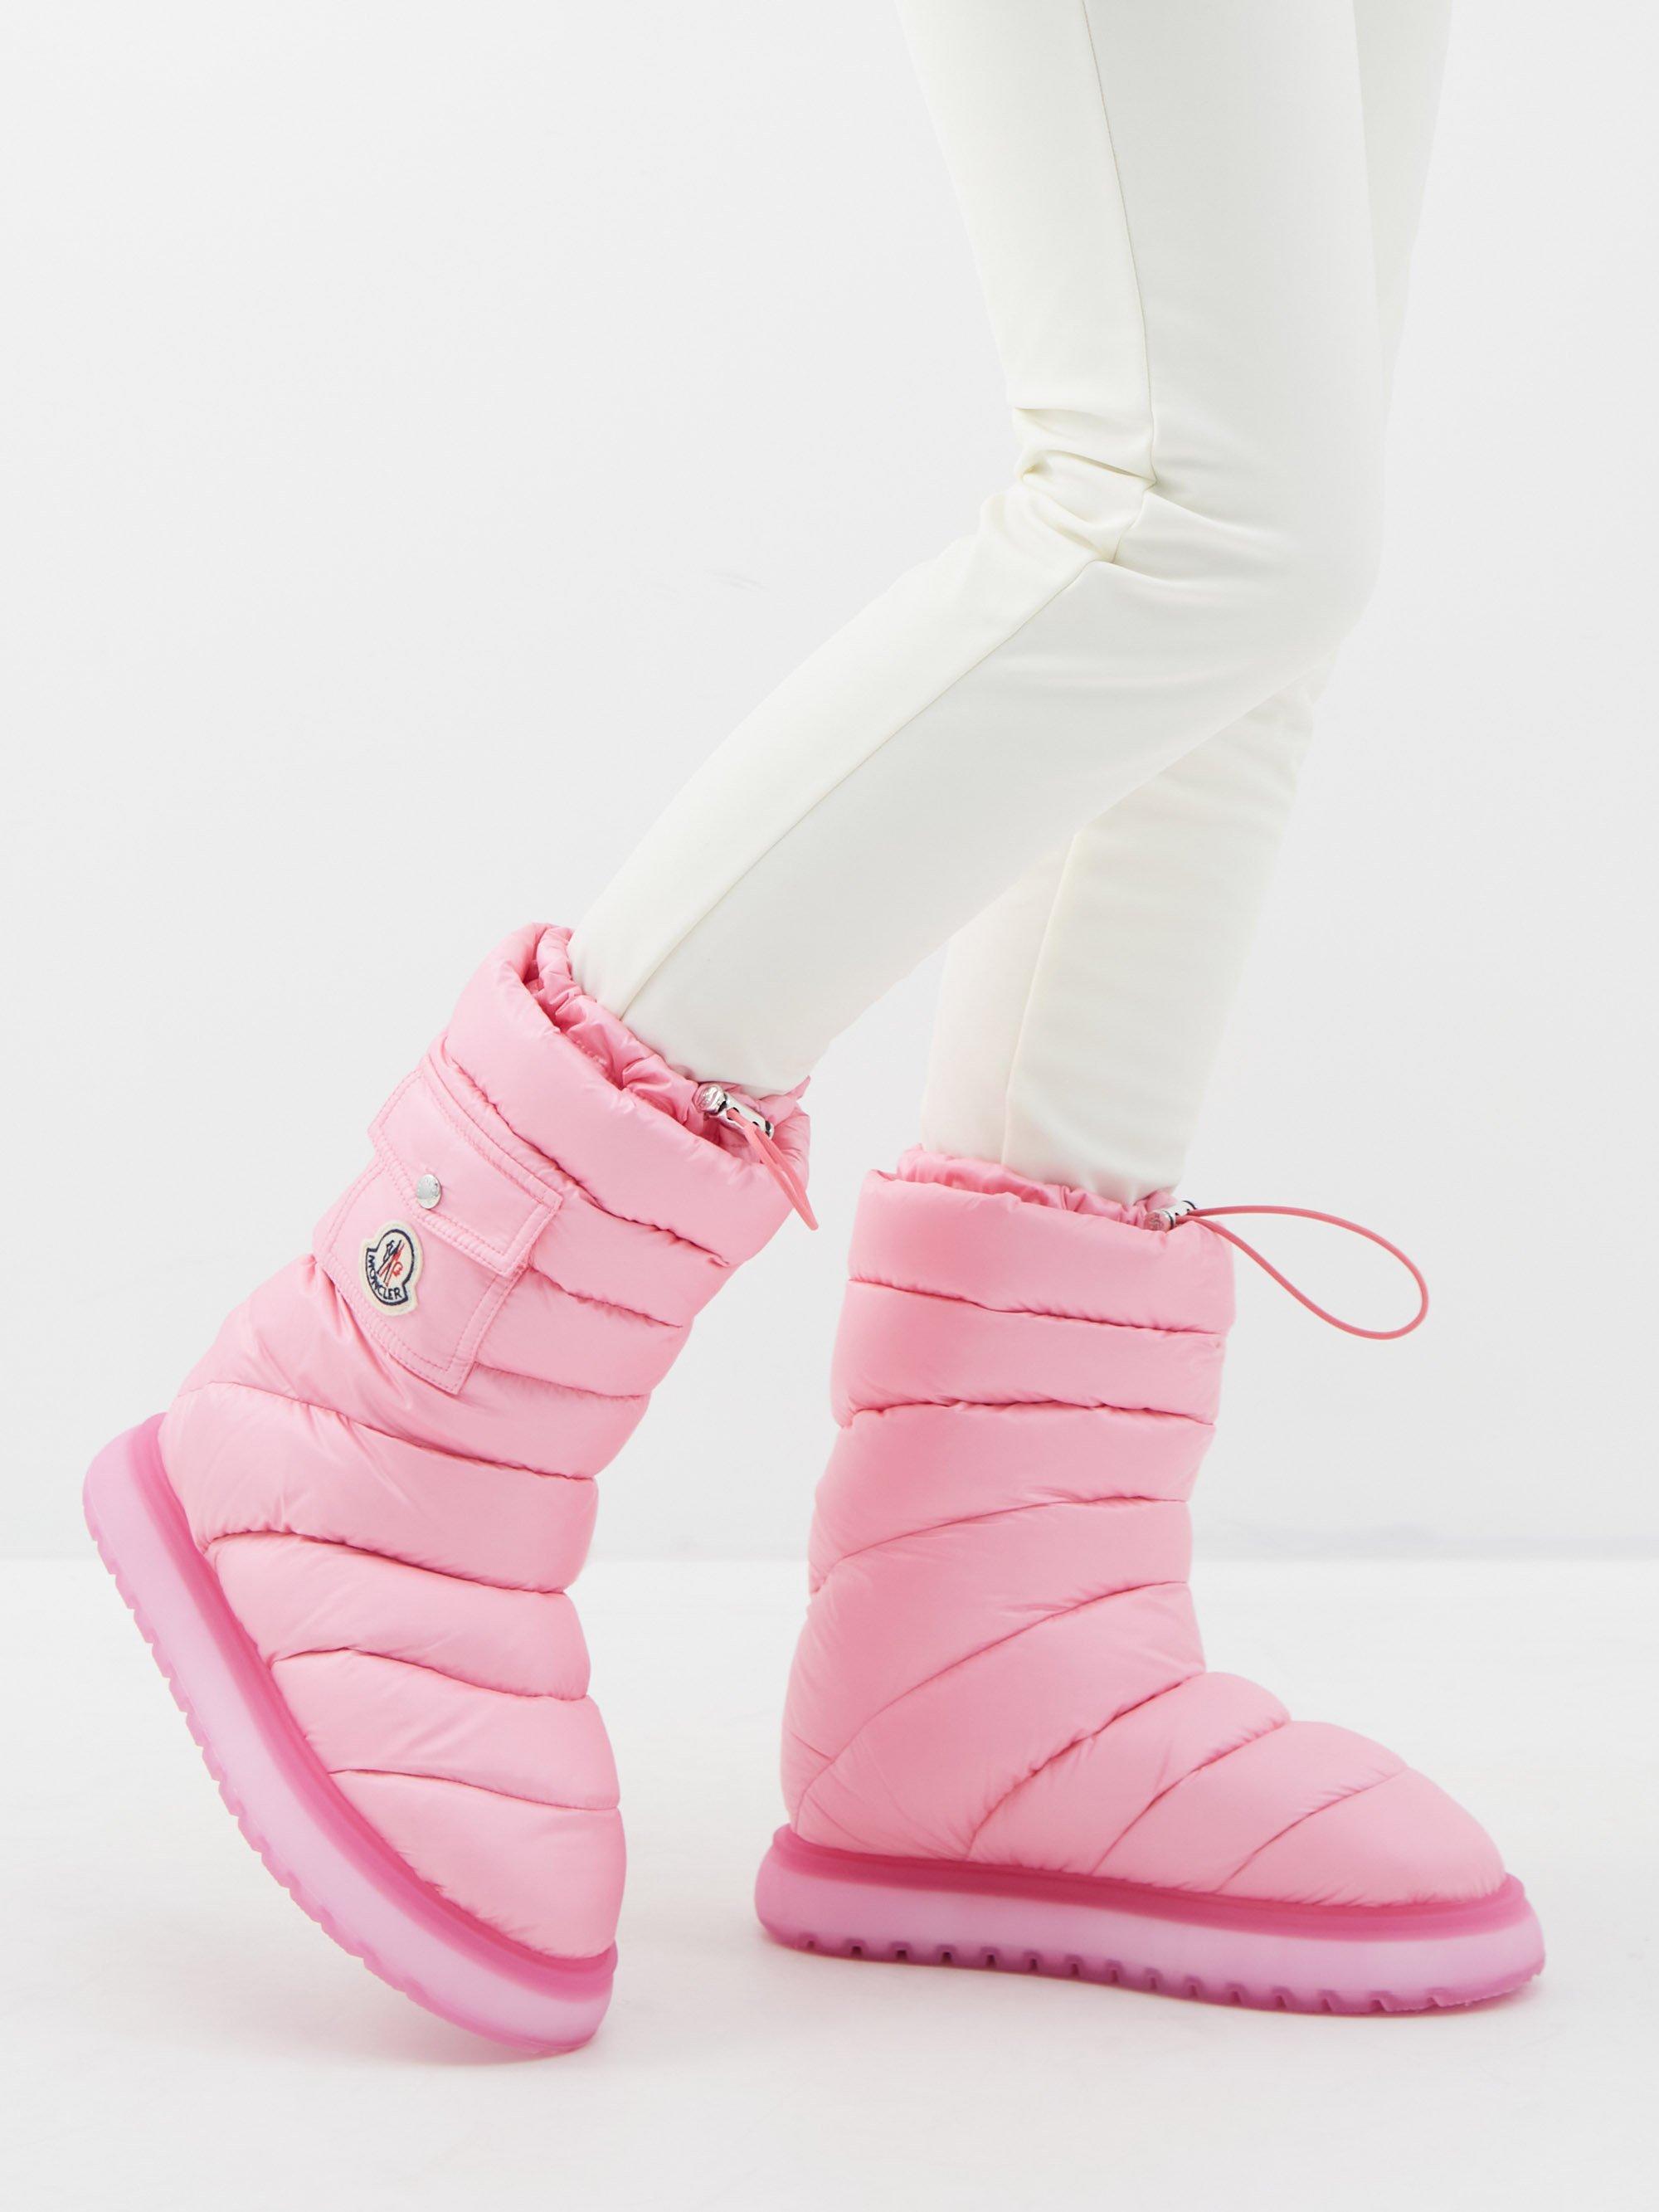 Moncler Gaia Pocket Quilted-down Snow Boots in Pink | Lyst